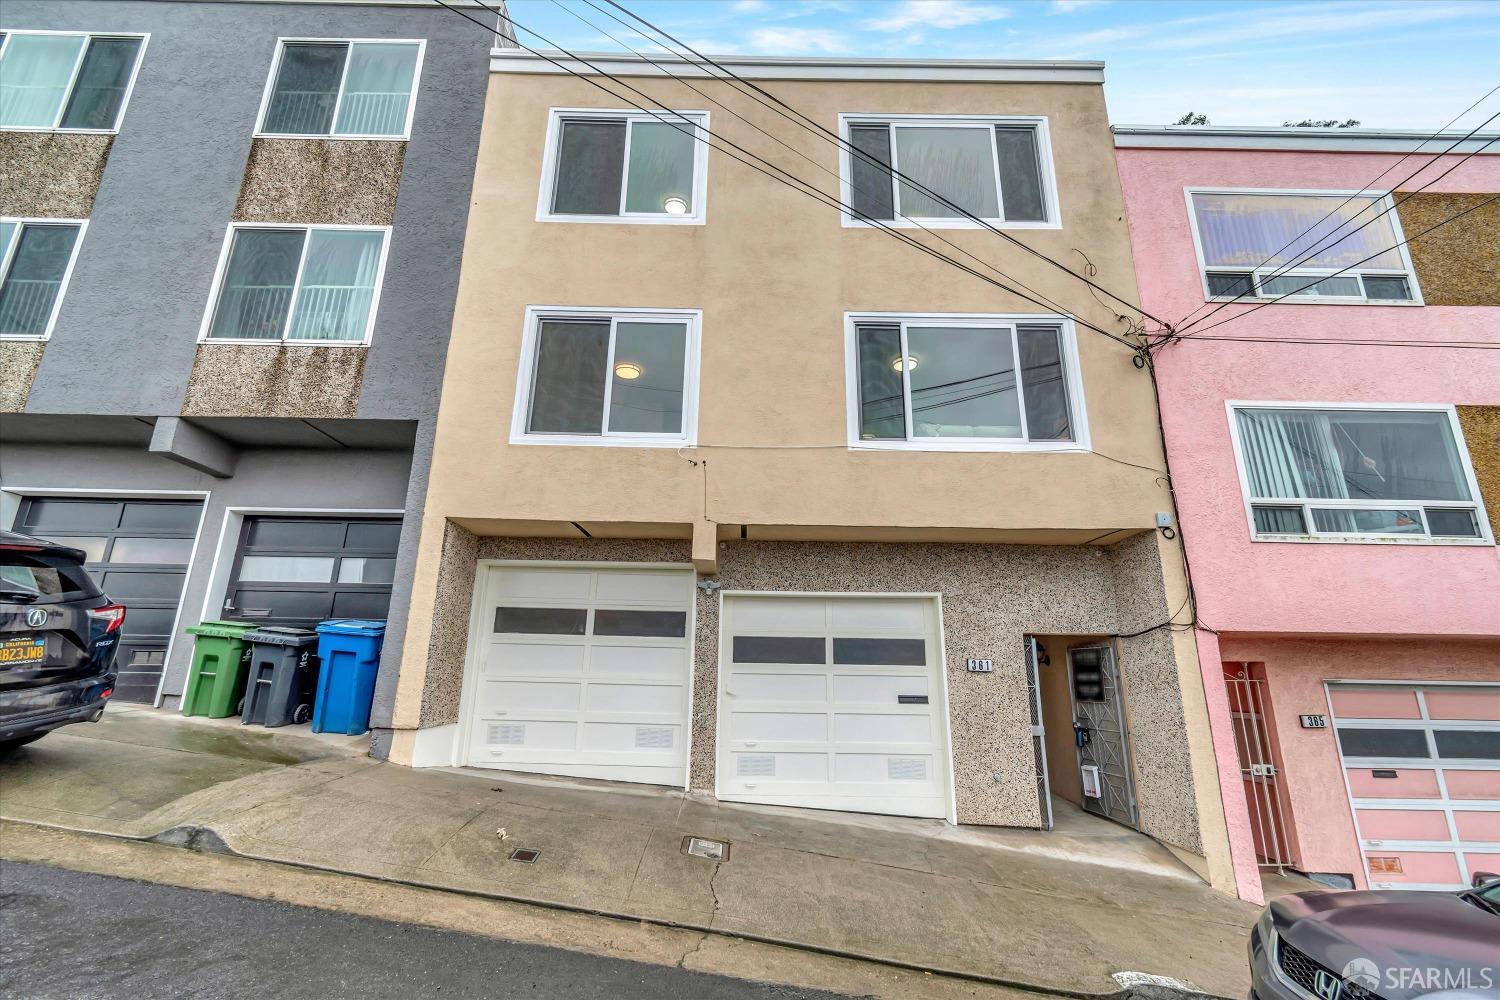 Photo of 361 Frankfort St in Daly City, CA